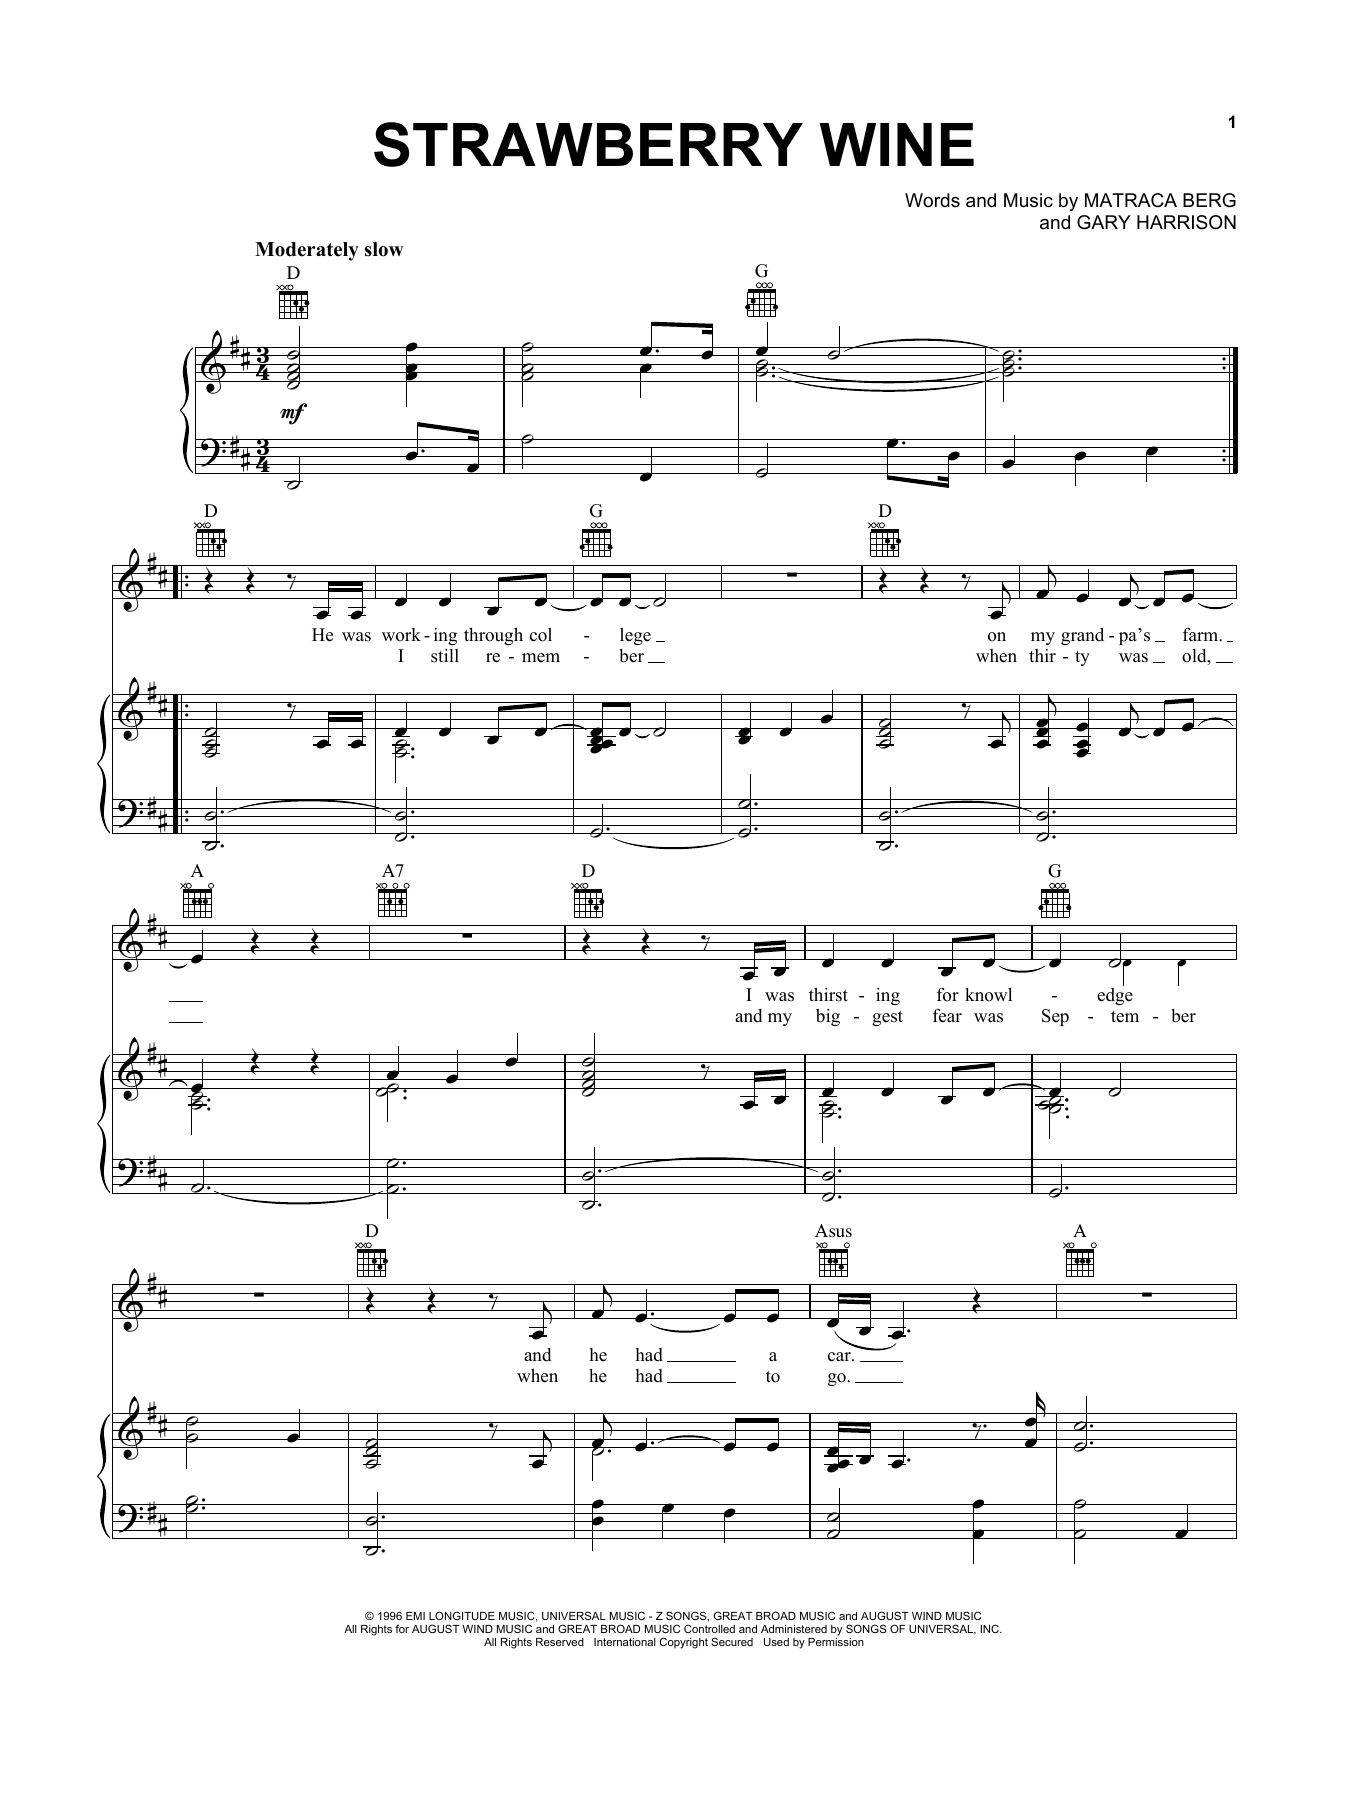 Deana Carter Strawberry Wine sheet music notes and chords. Download Printable PDF.